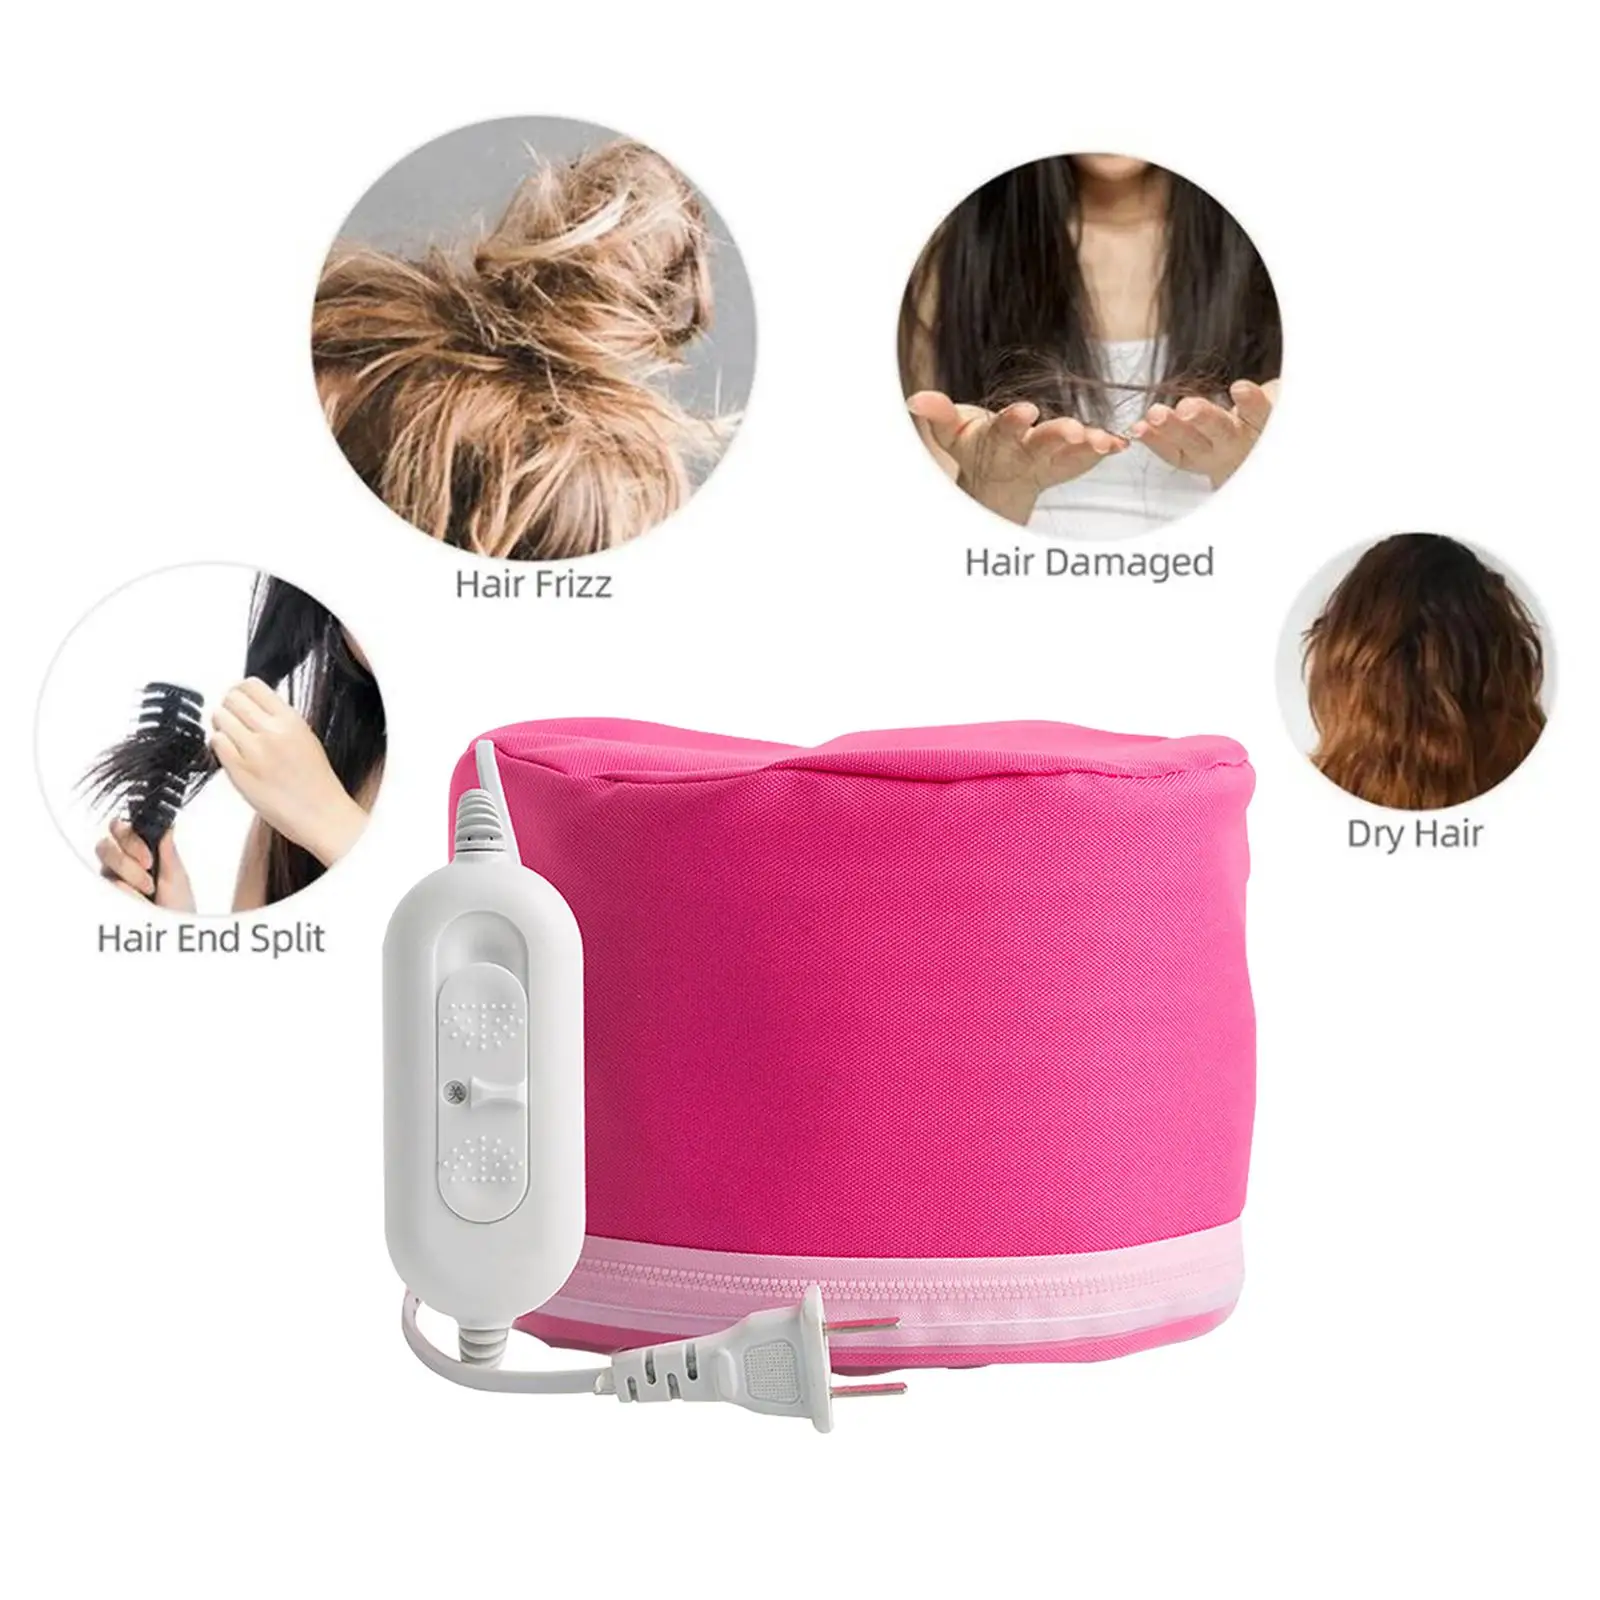 Hair Heating Caps Steamer 3-Mode Adjustable Hair Steamer Heating Hat for Deep Conditioning Home Salon Nursing Drying Teen Adults